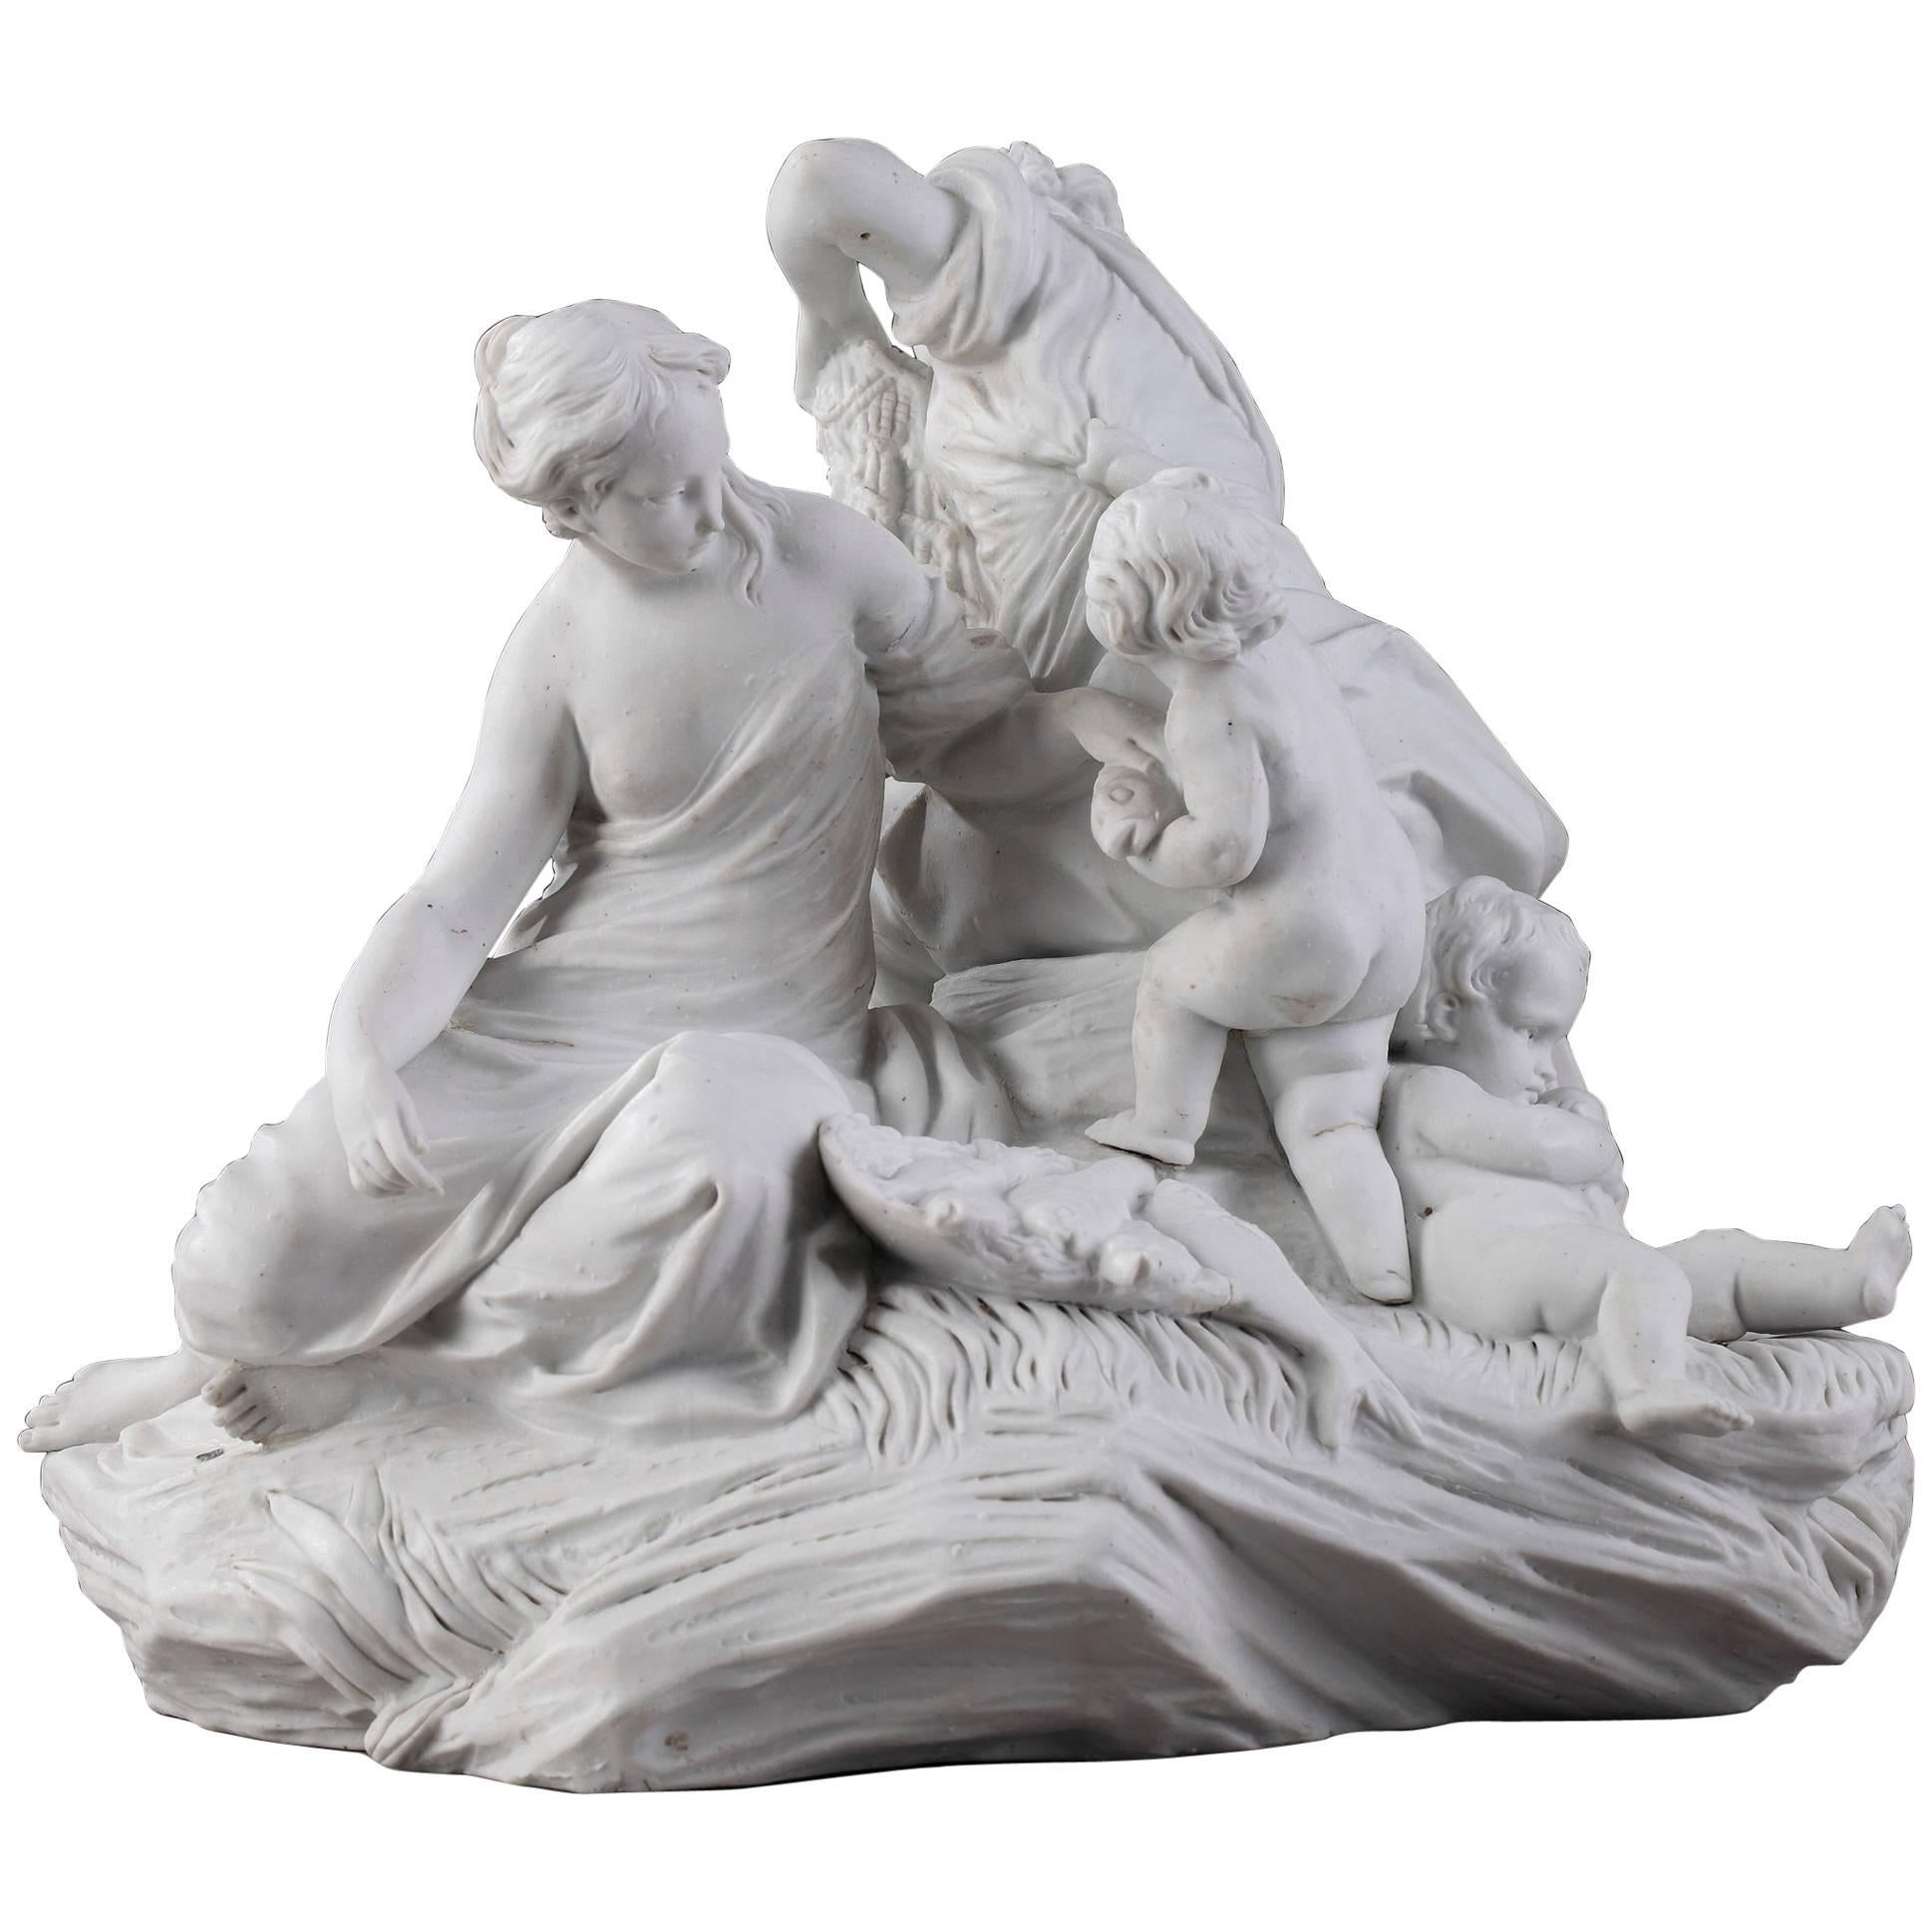 Rare 19th Century Biscuit Group "La Pêche" After a Model by Falconet